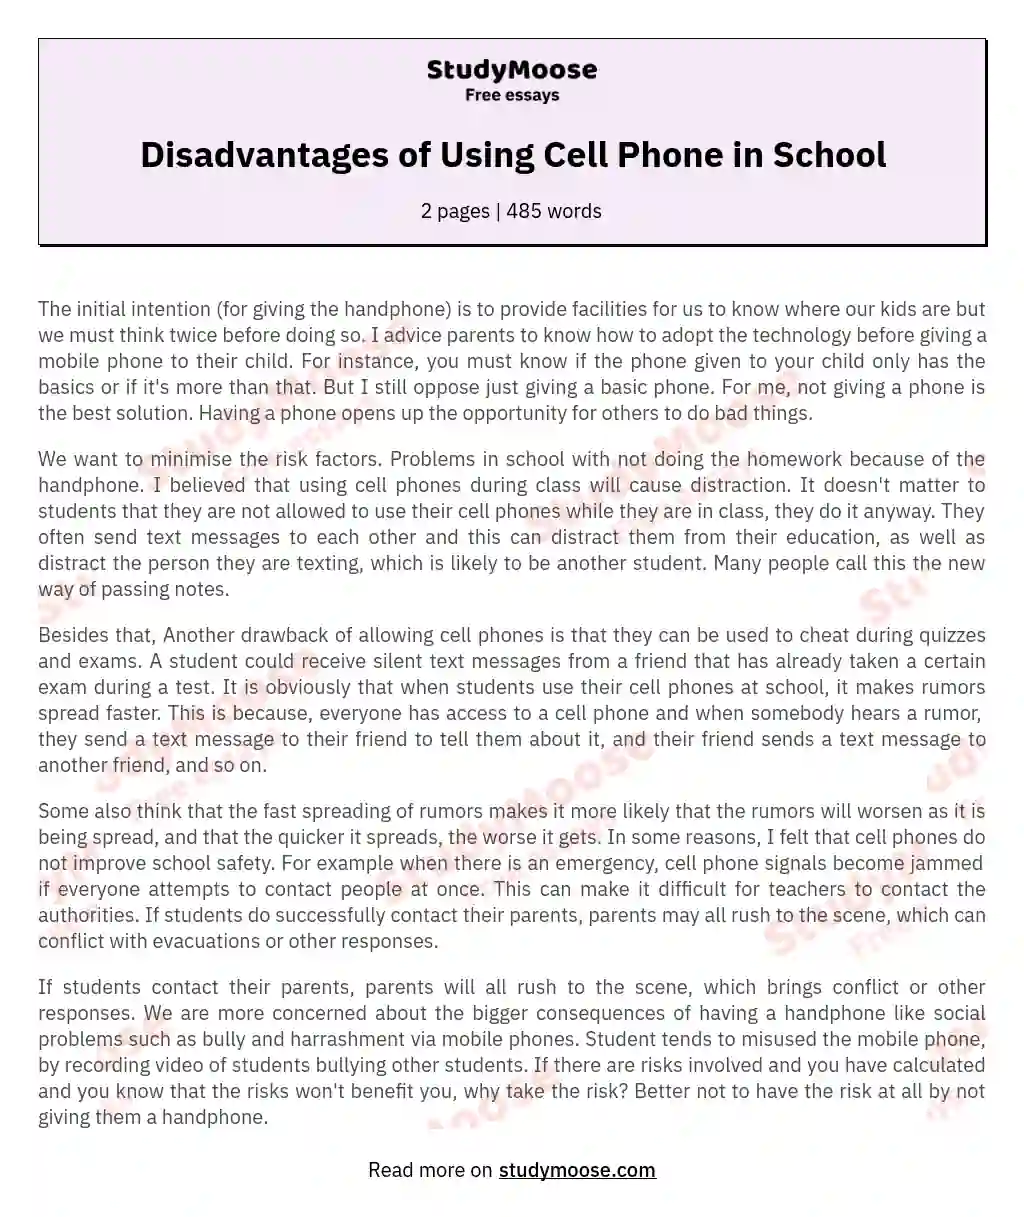 Disadvantages of Using Cell Phone in School